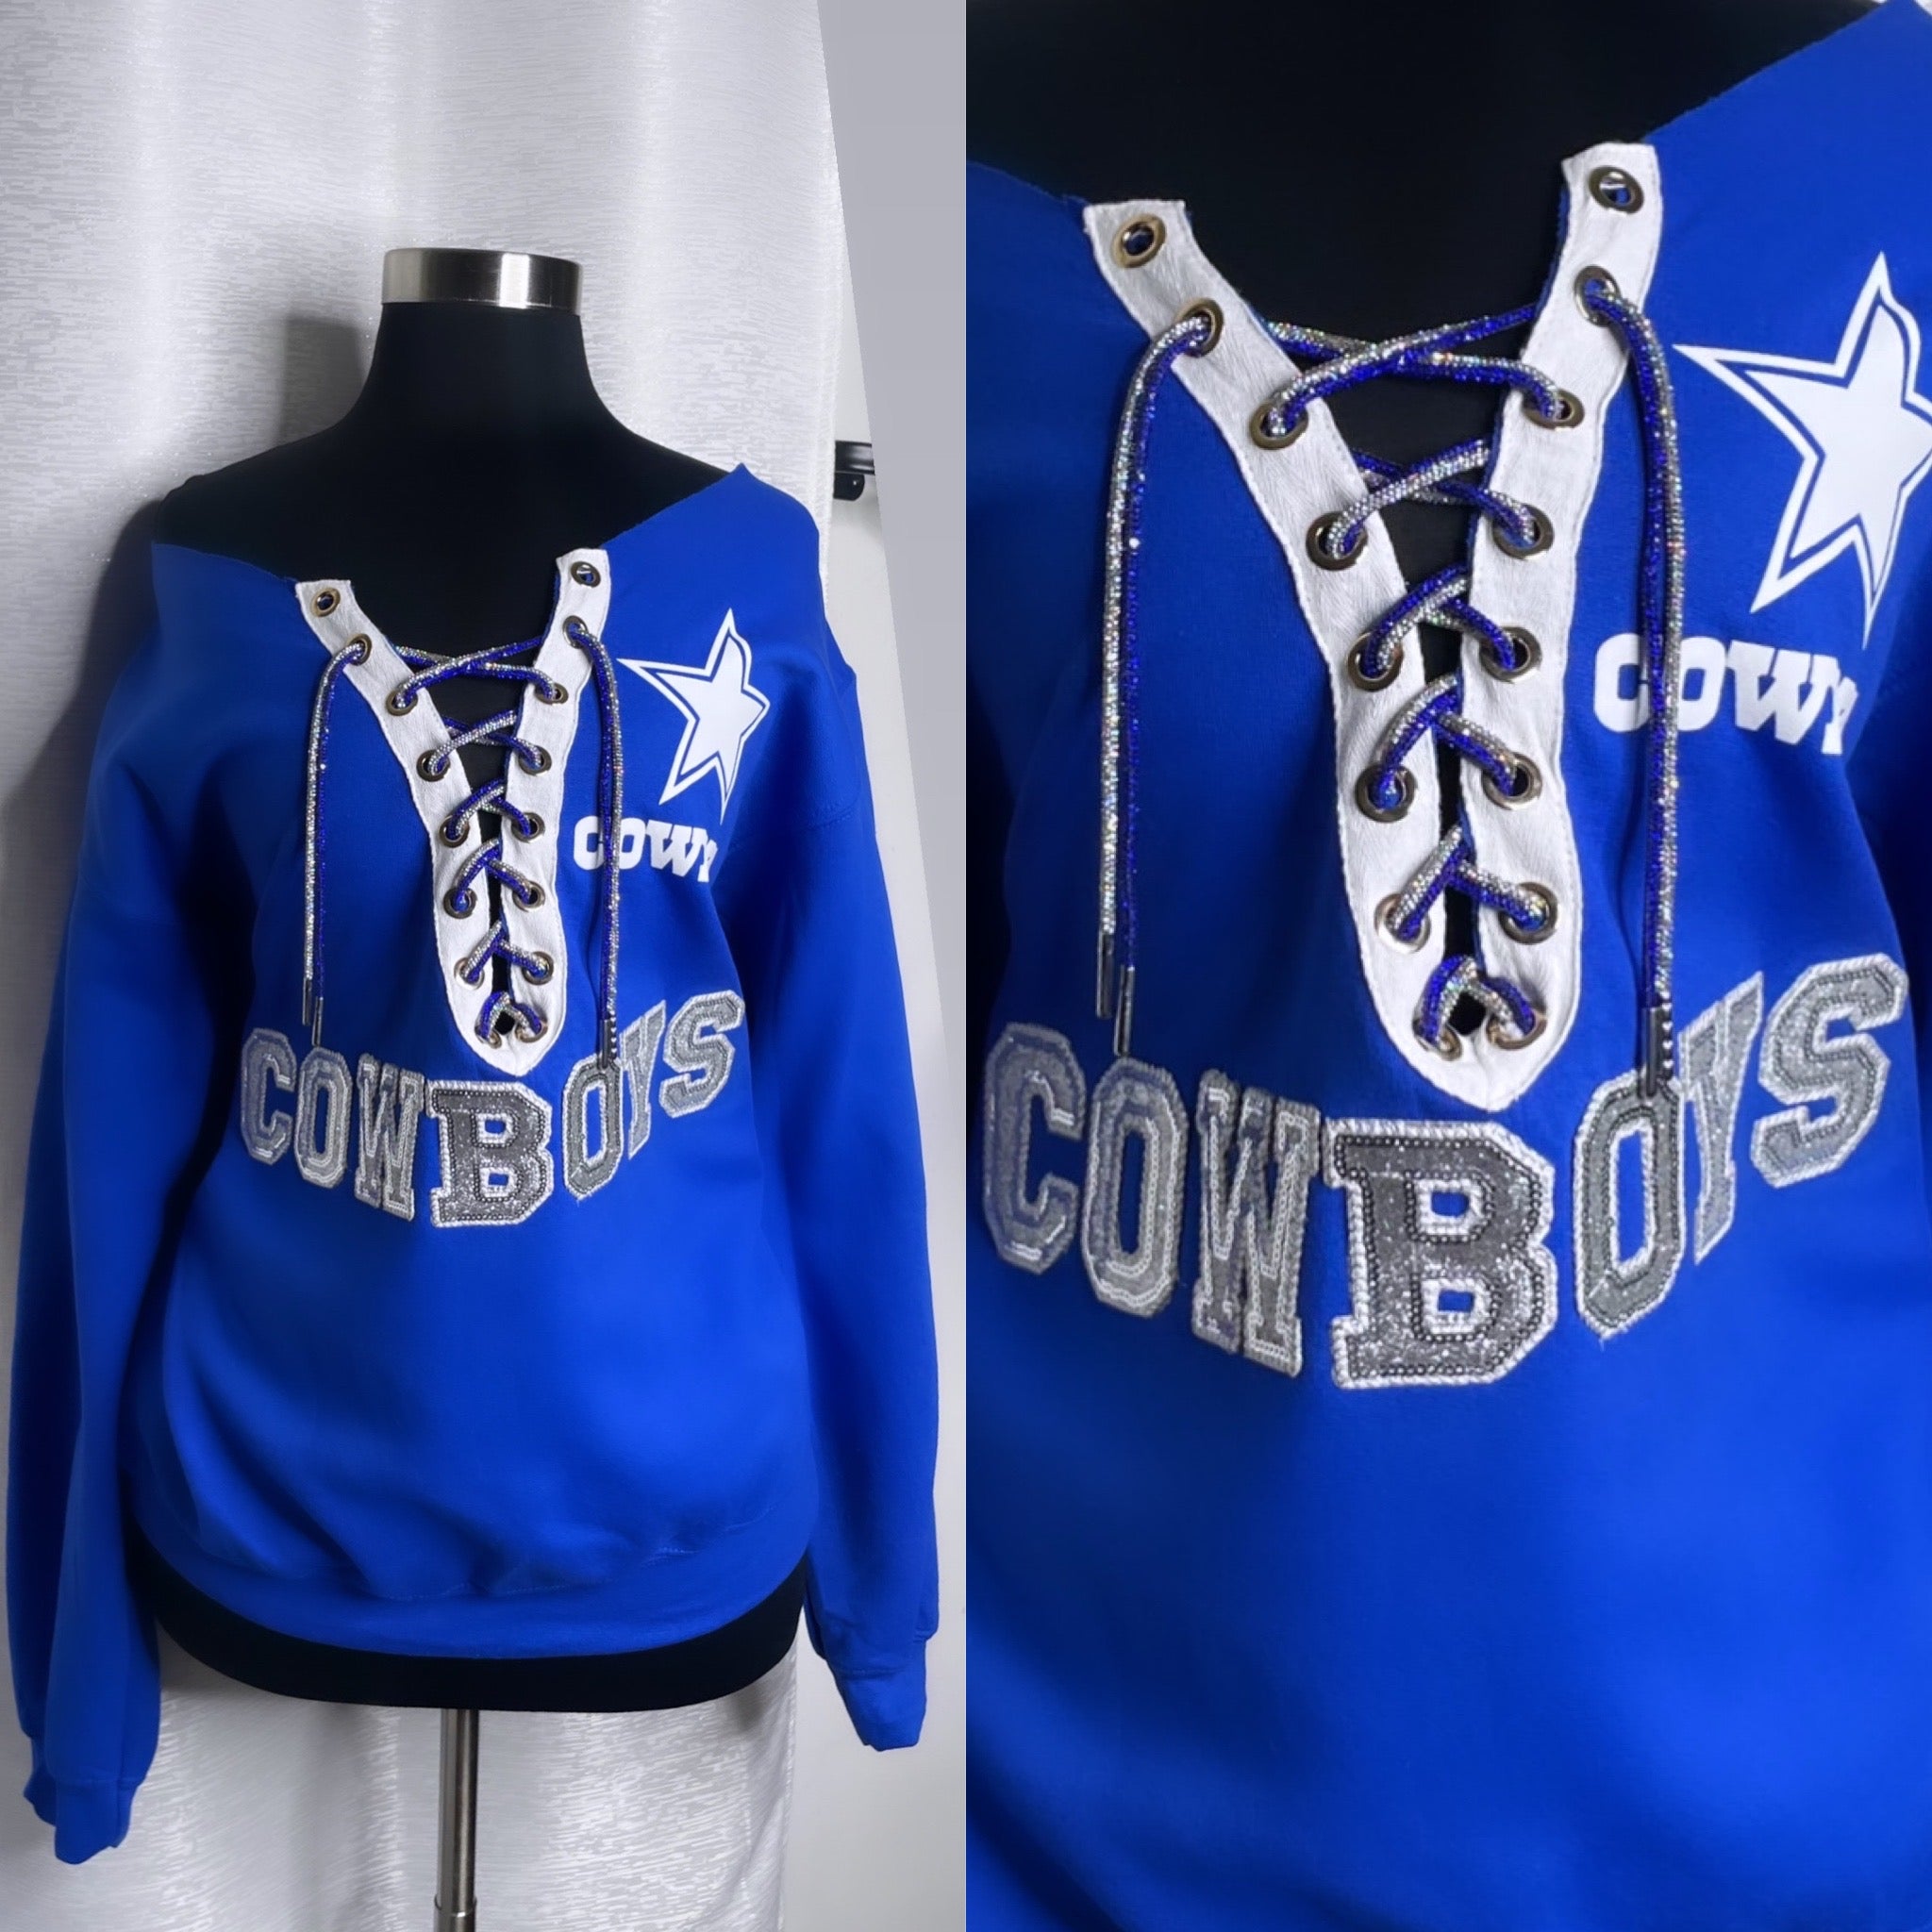 Cowboys off the shoulder sweater with glitter/sequin logo